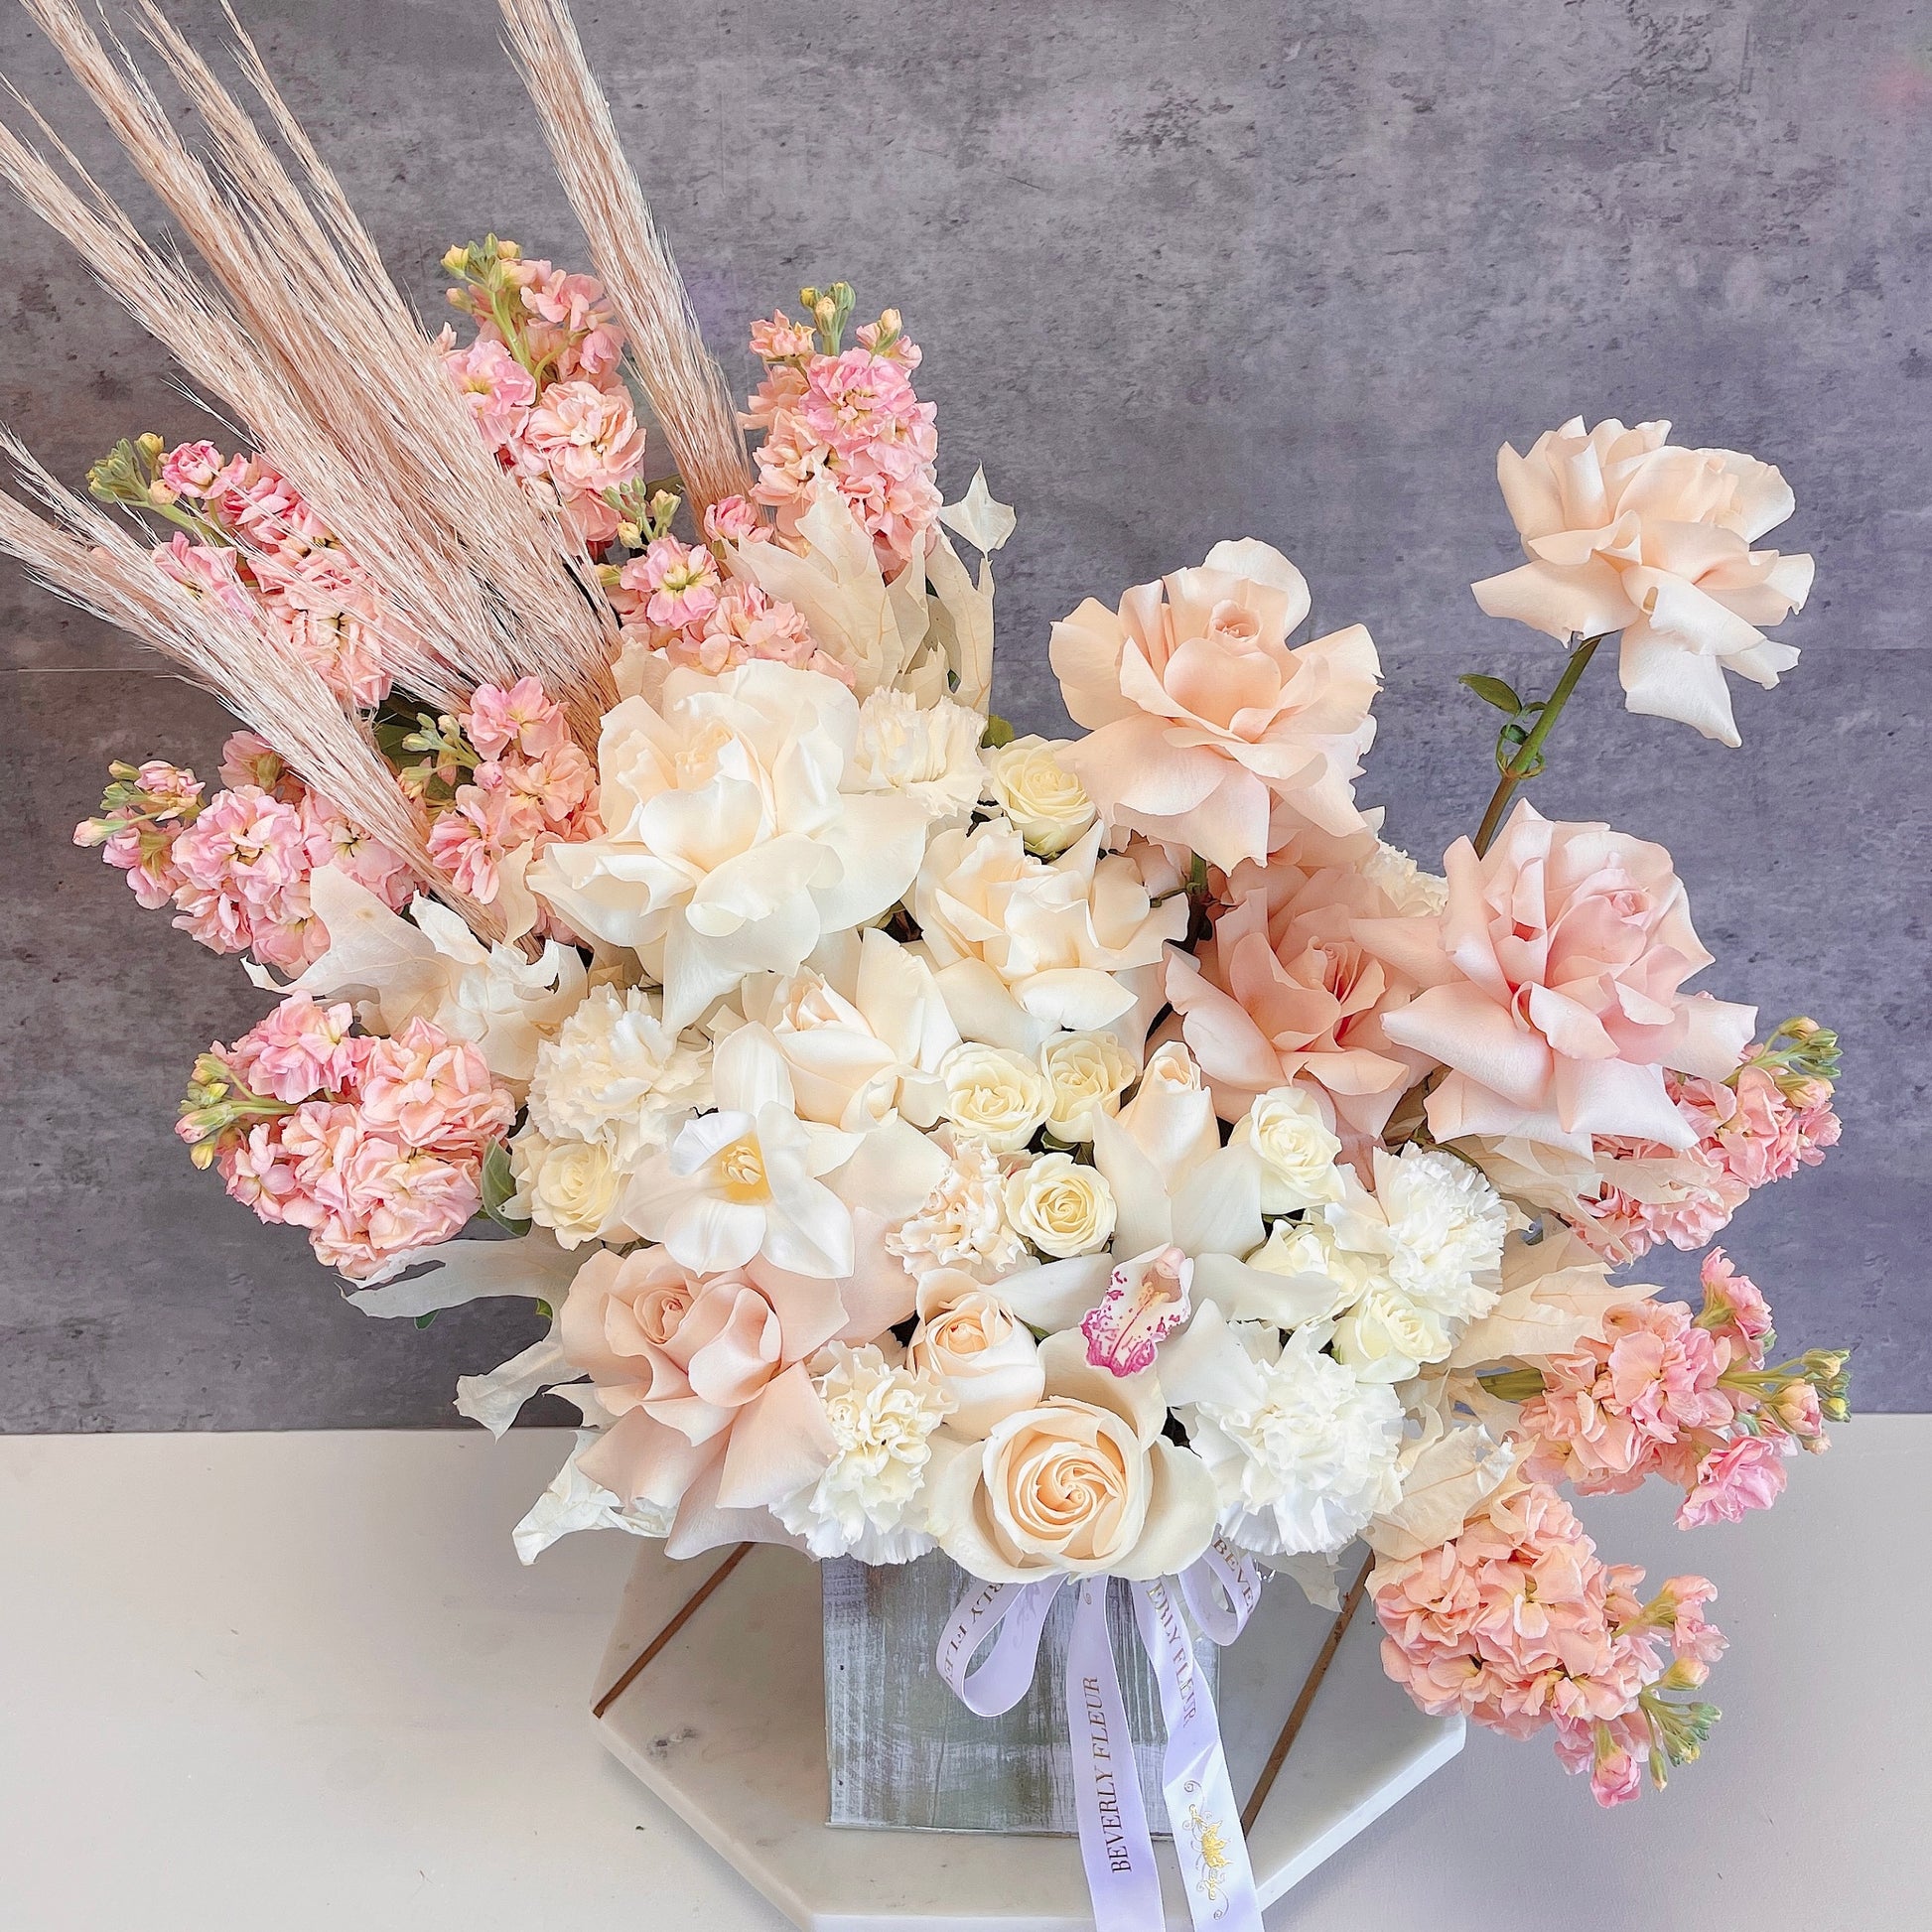 OC Beverly Flowers – Fountain Valley Flowers Delivery